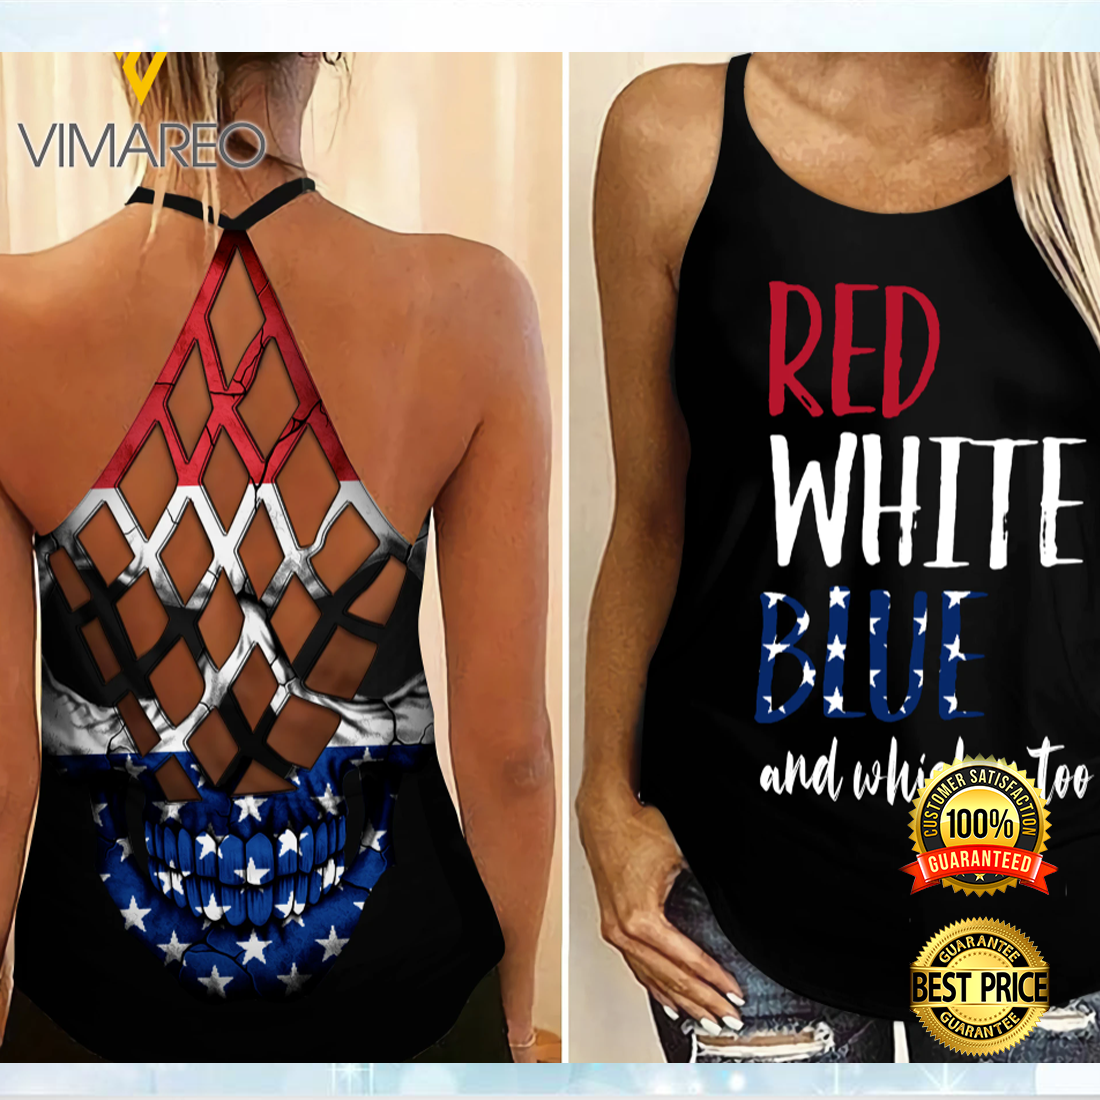 Red white blue and whiskey too criss cross tank top 4